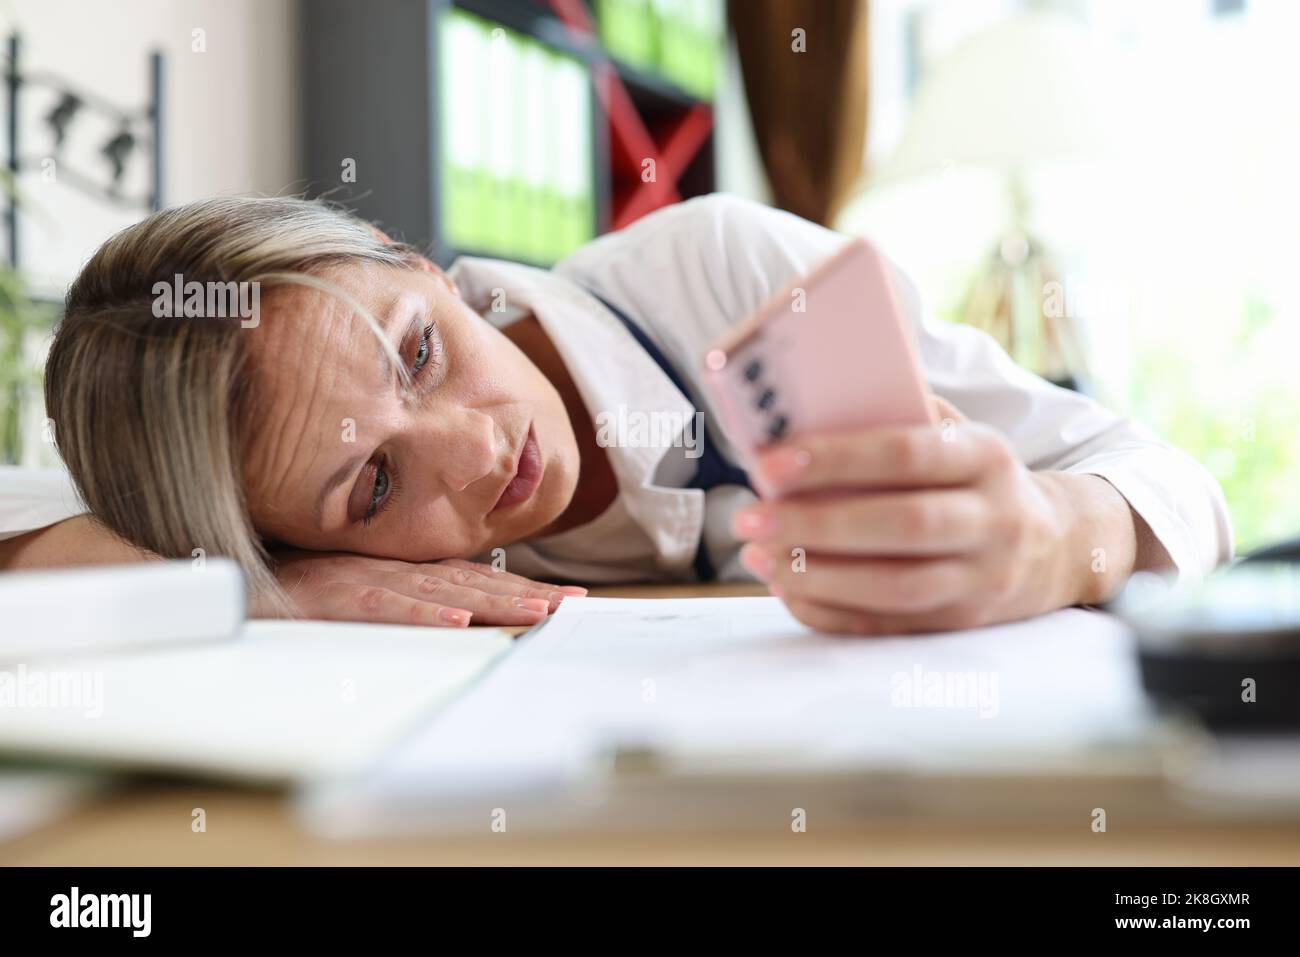 Tired doctor putting head on table and surfing internet on smartphone Stock Photo